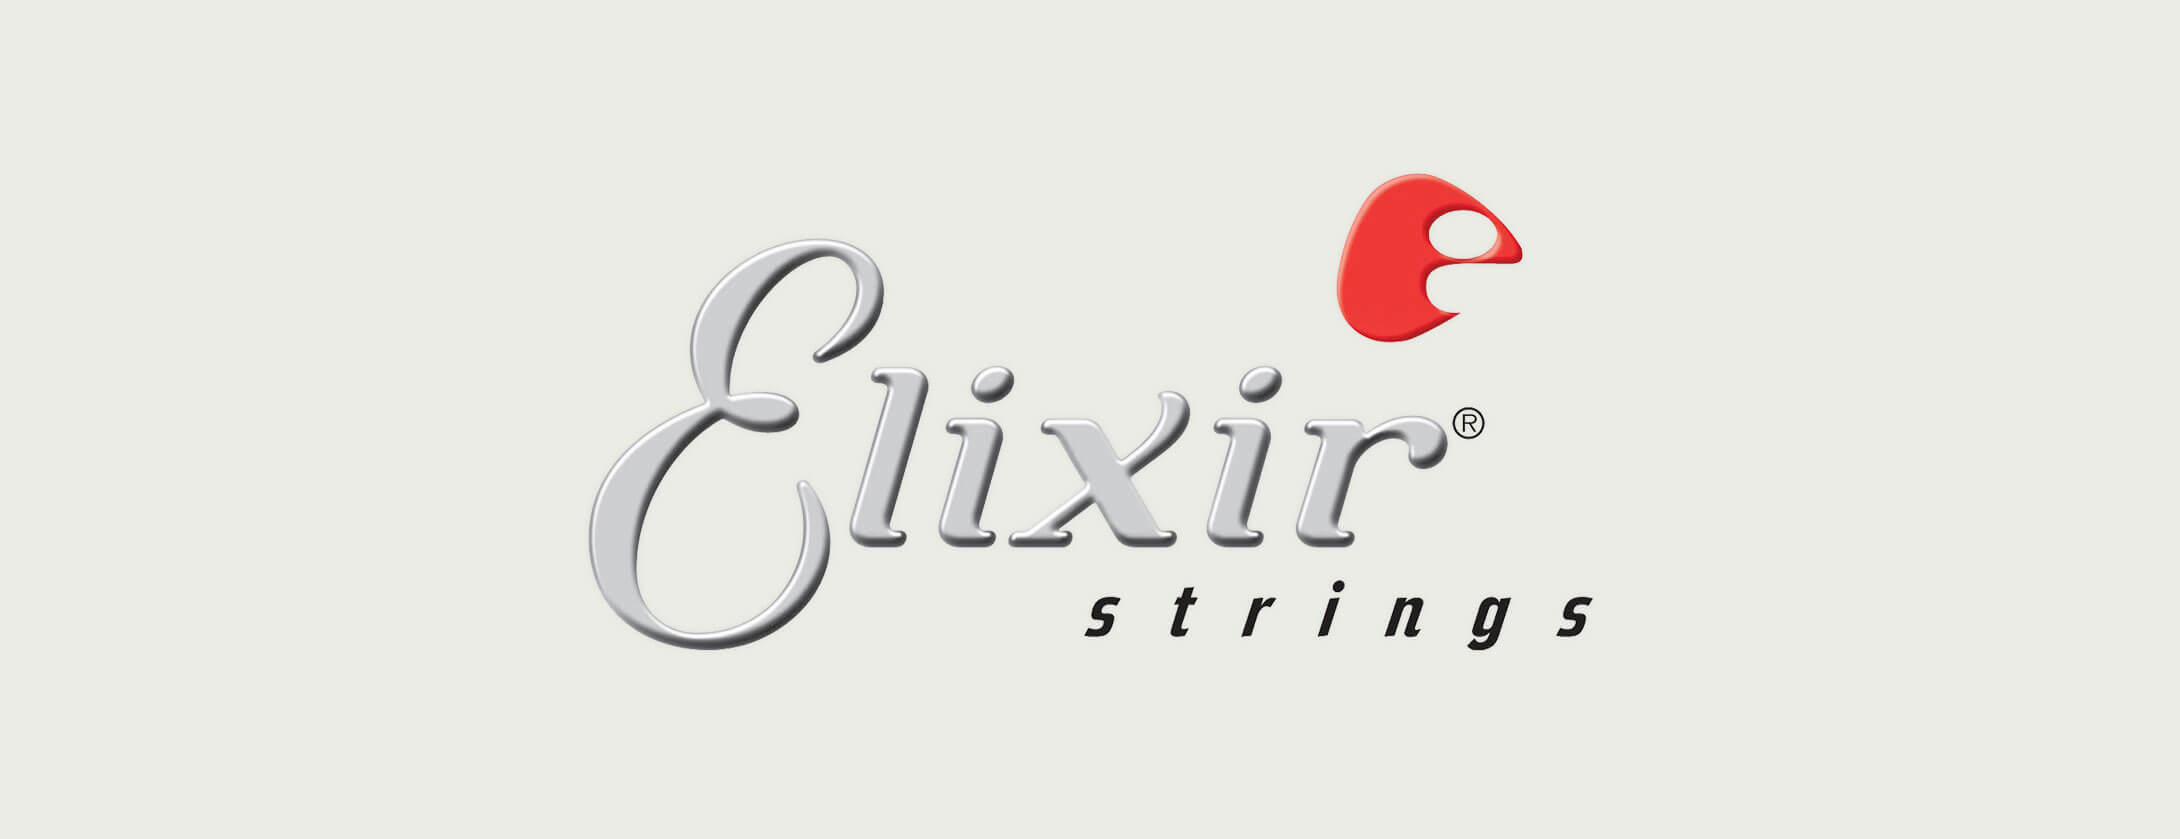 Maintenance Guide - Elixir strings are the best